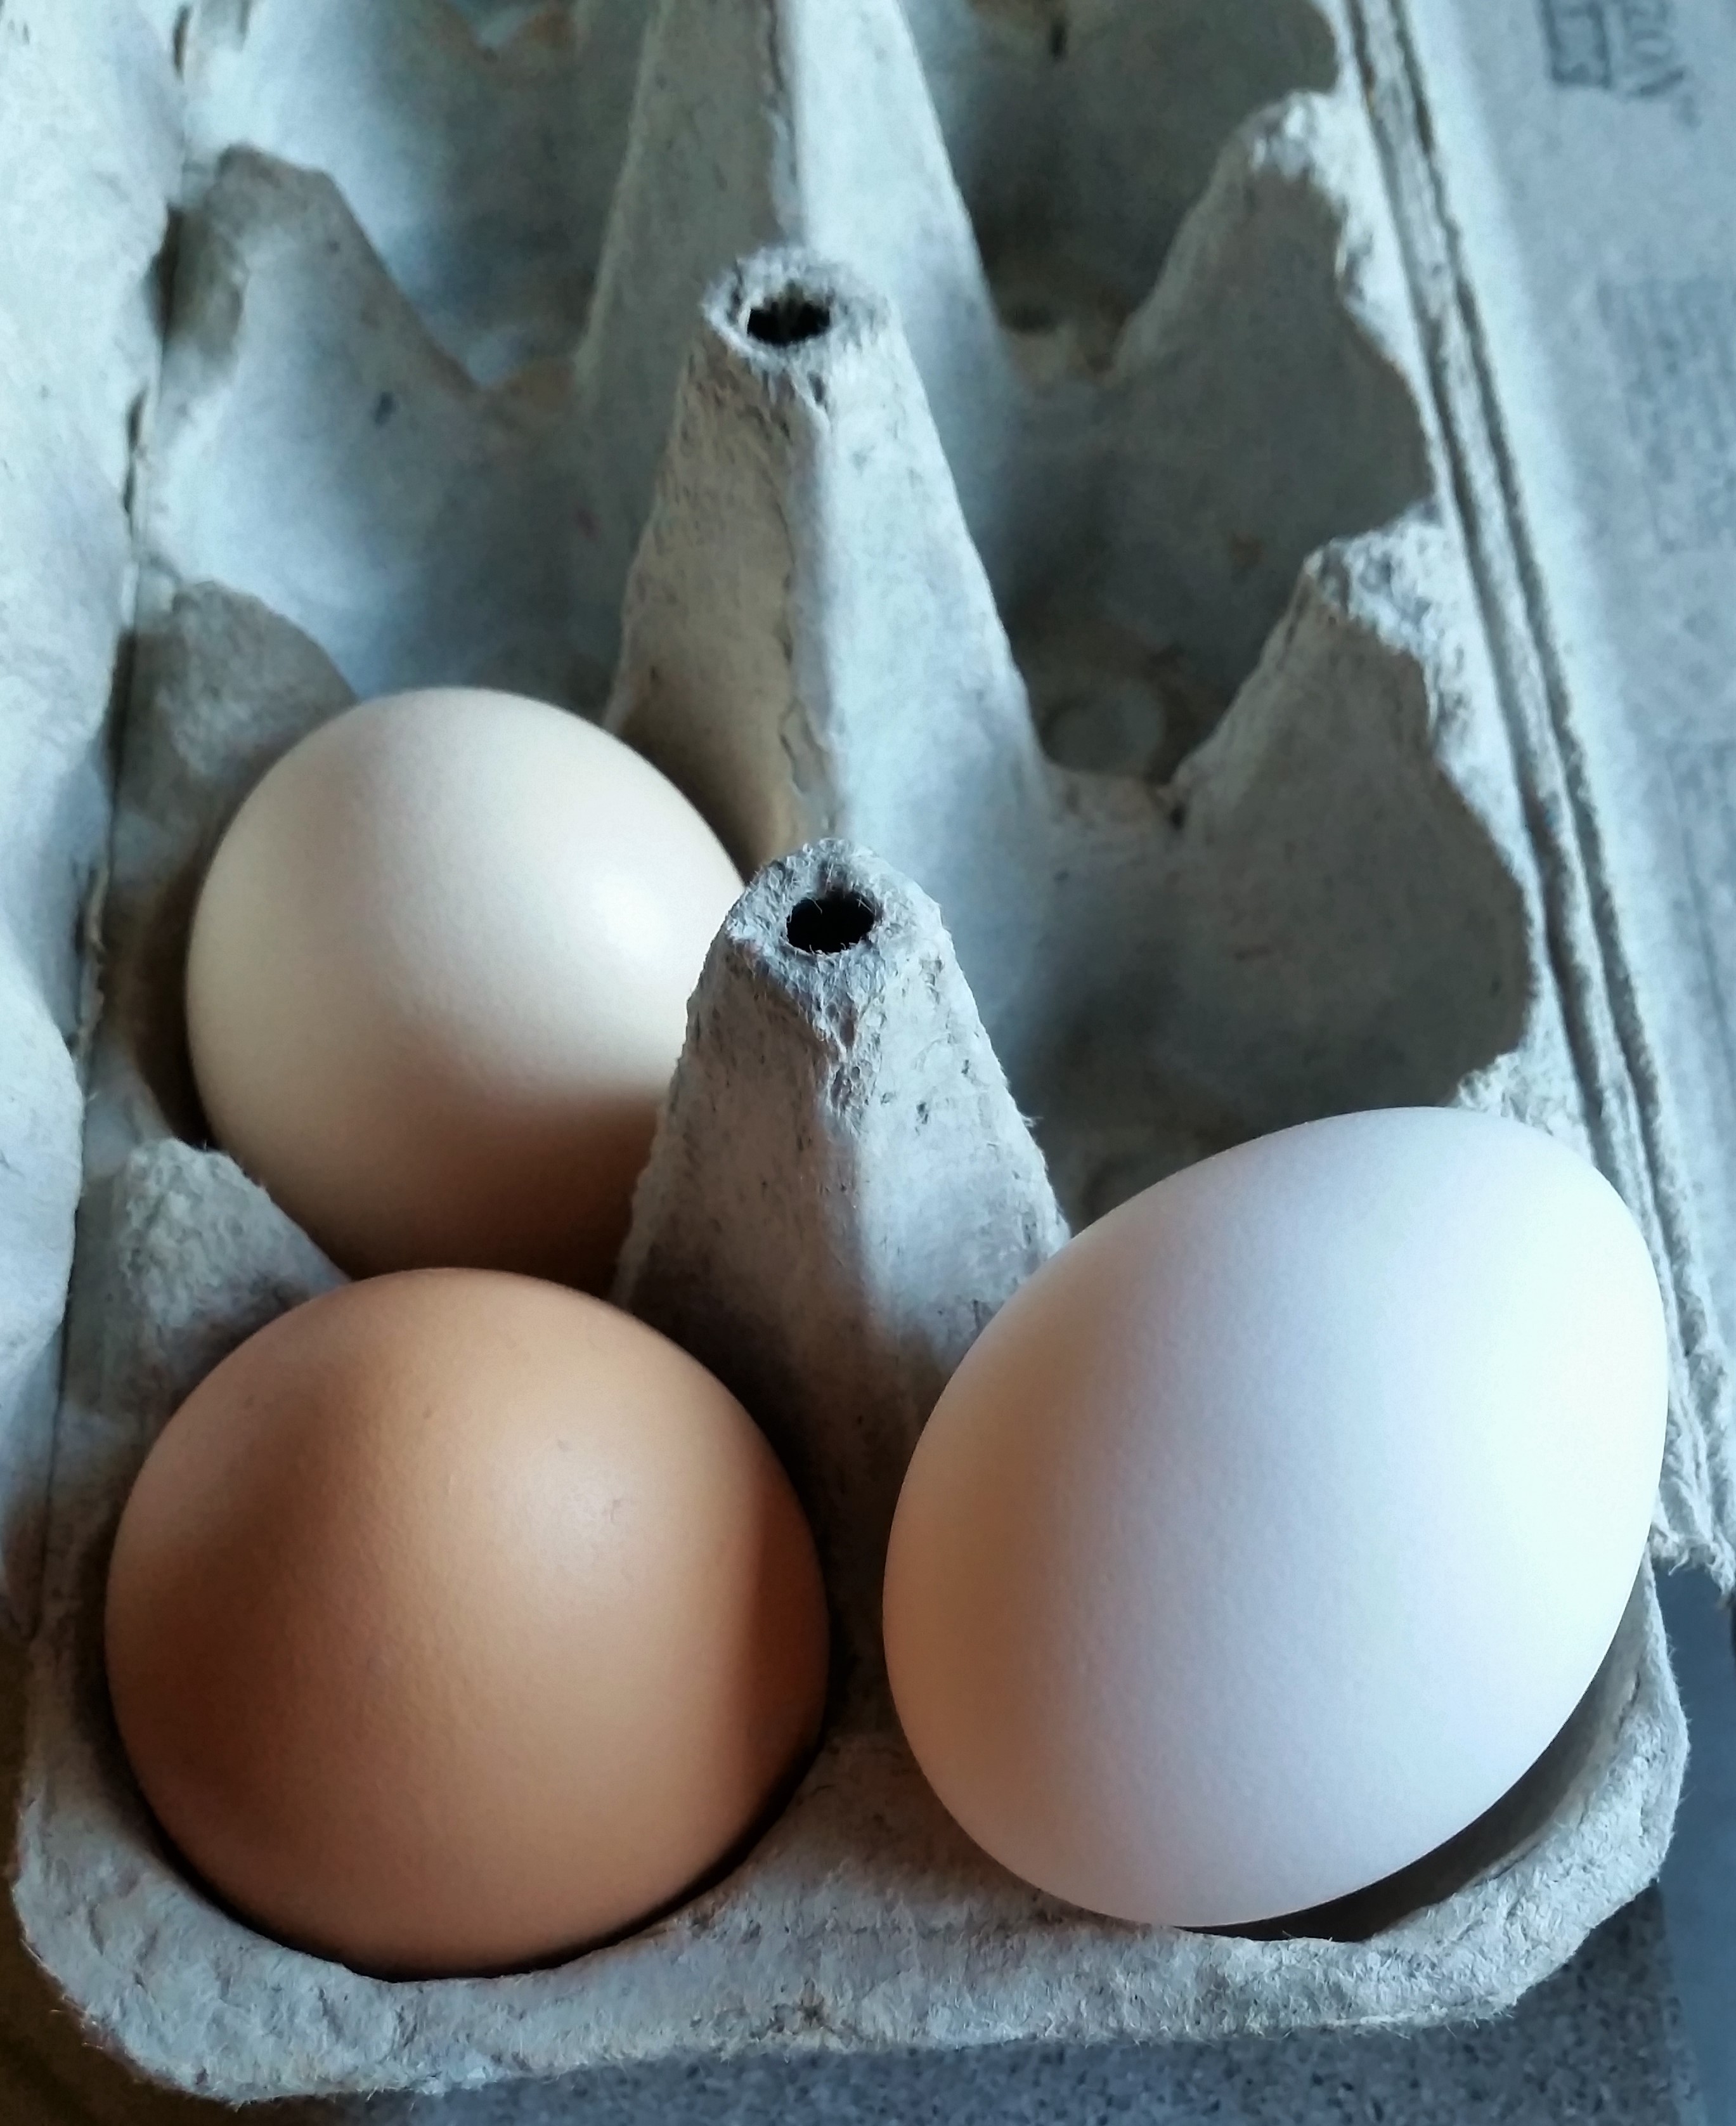 Silver Laced Polish (white egg on right) First Egg - 45.3g 12/14/15